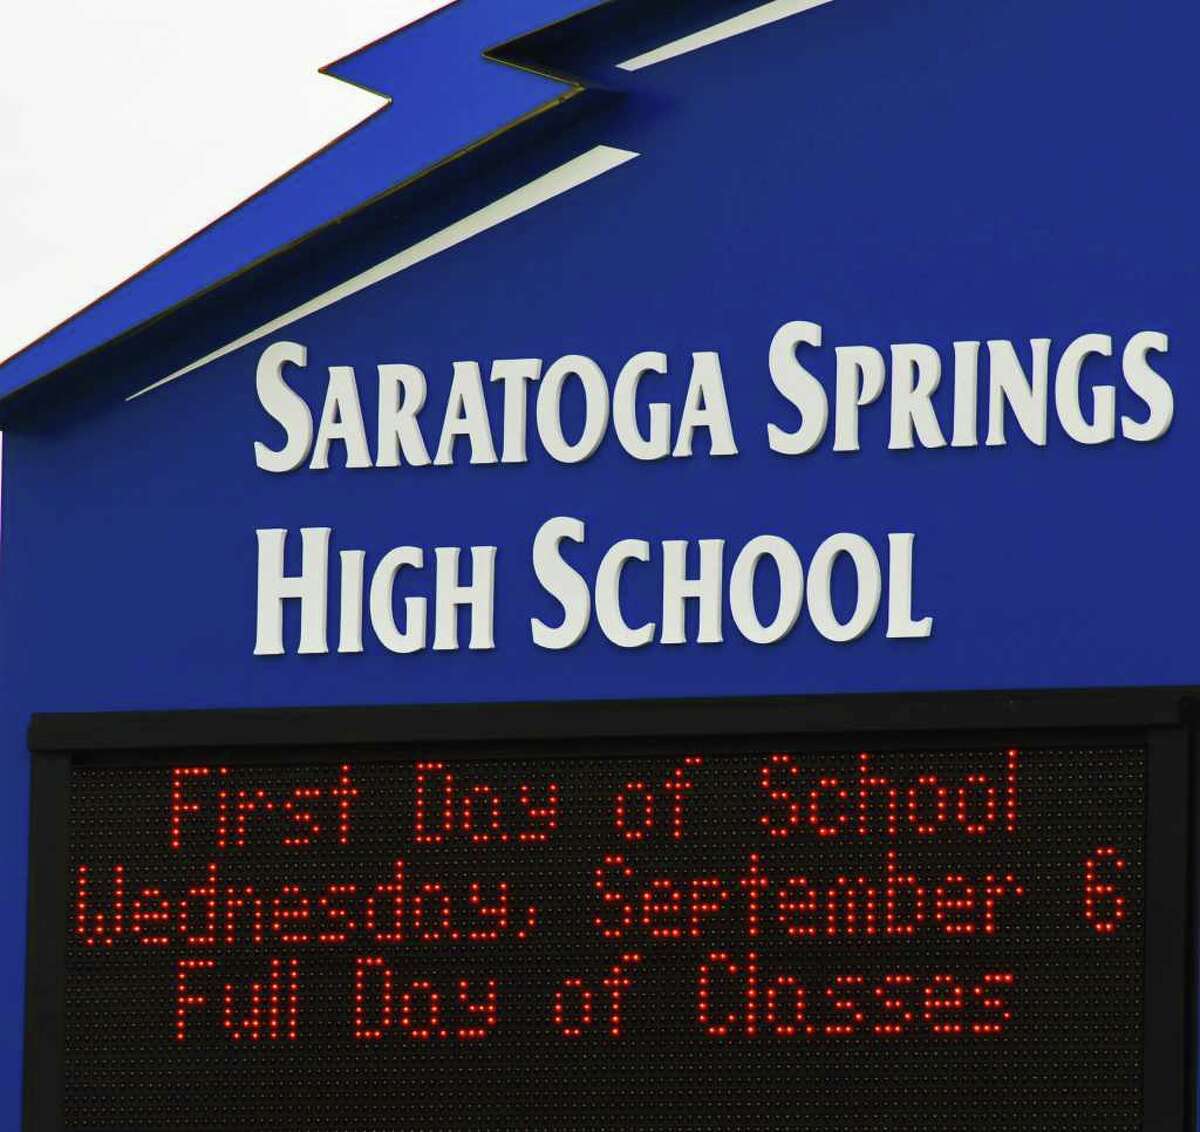 Saratoga Springs High School's sign. (John Carl D'Annibale / Times Union Archive)